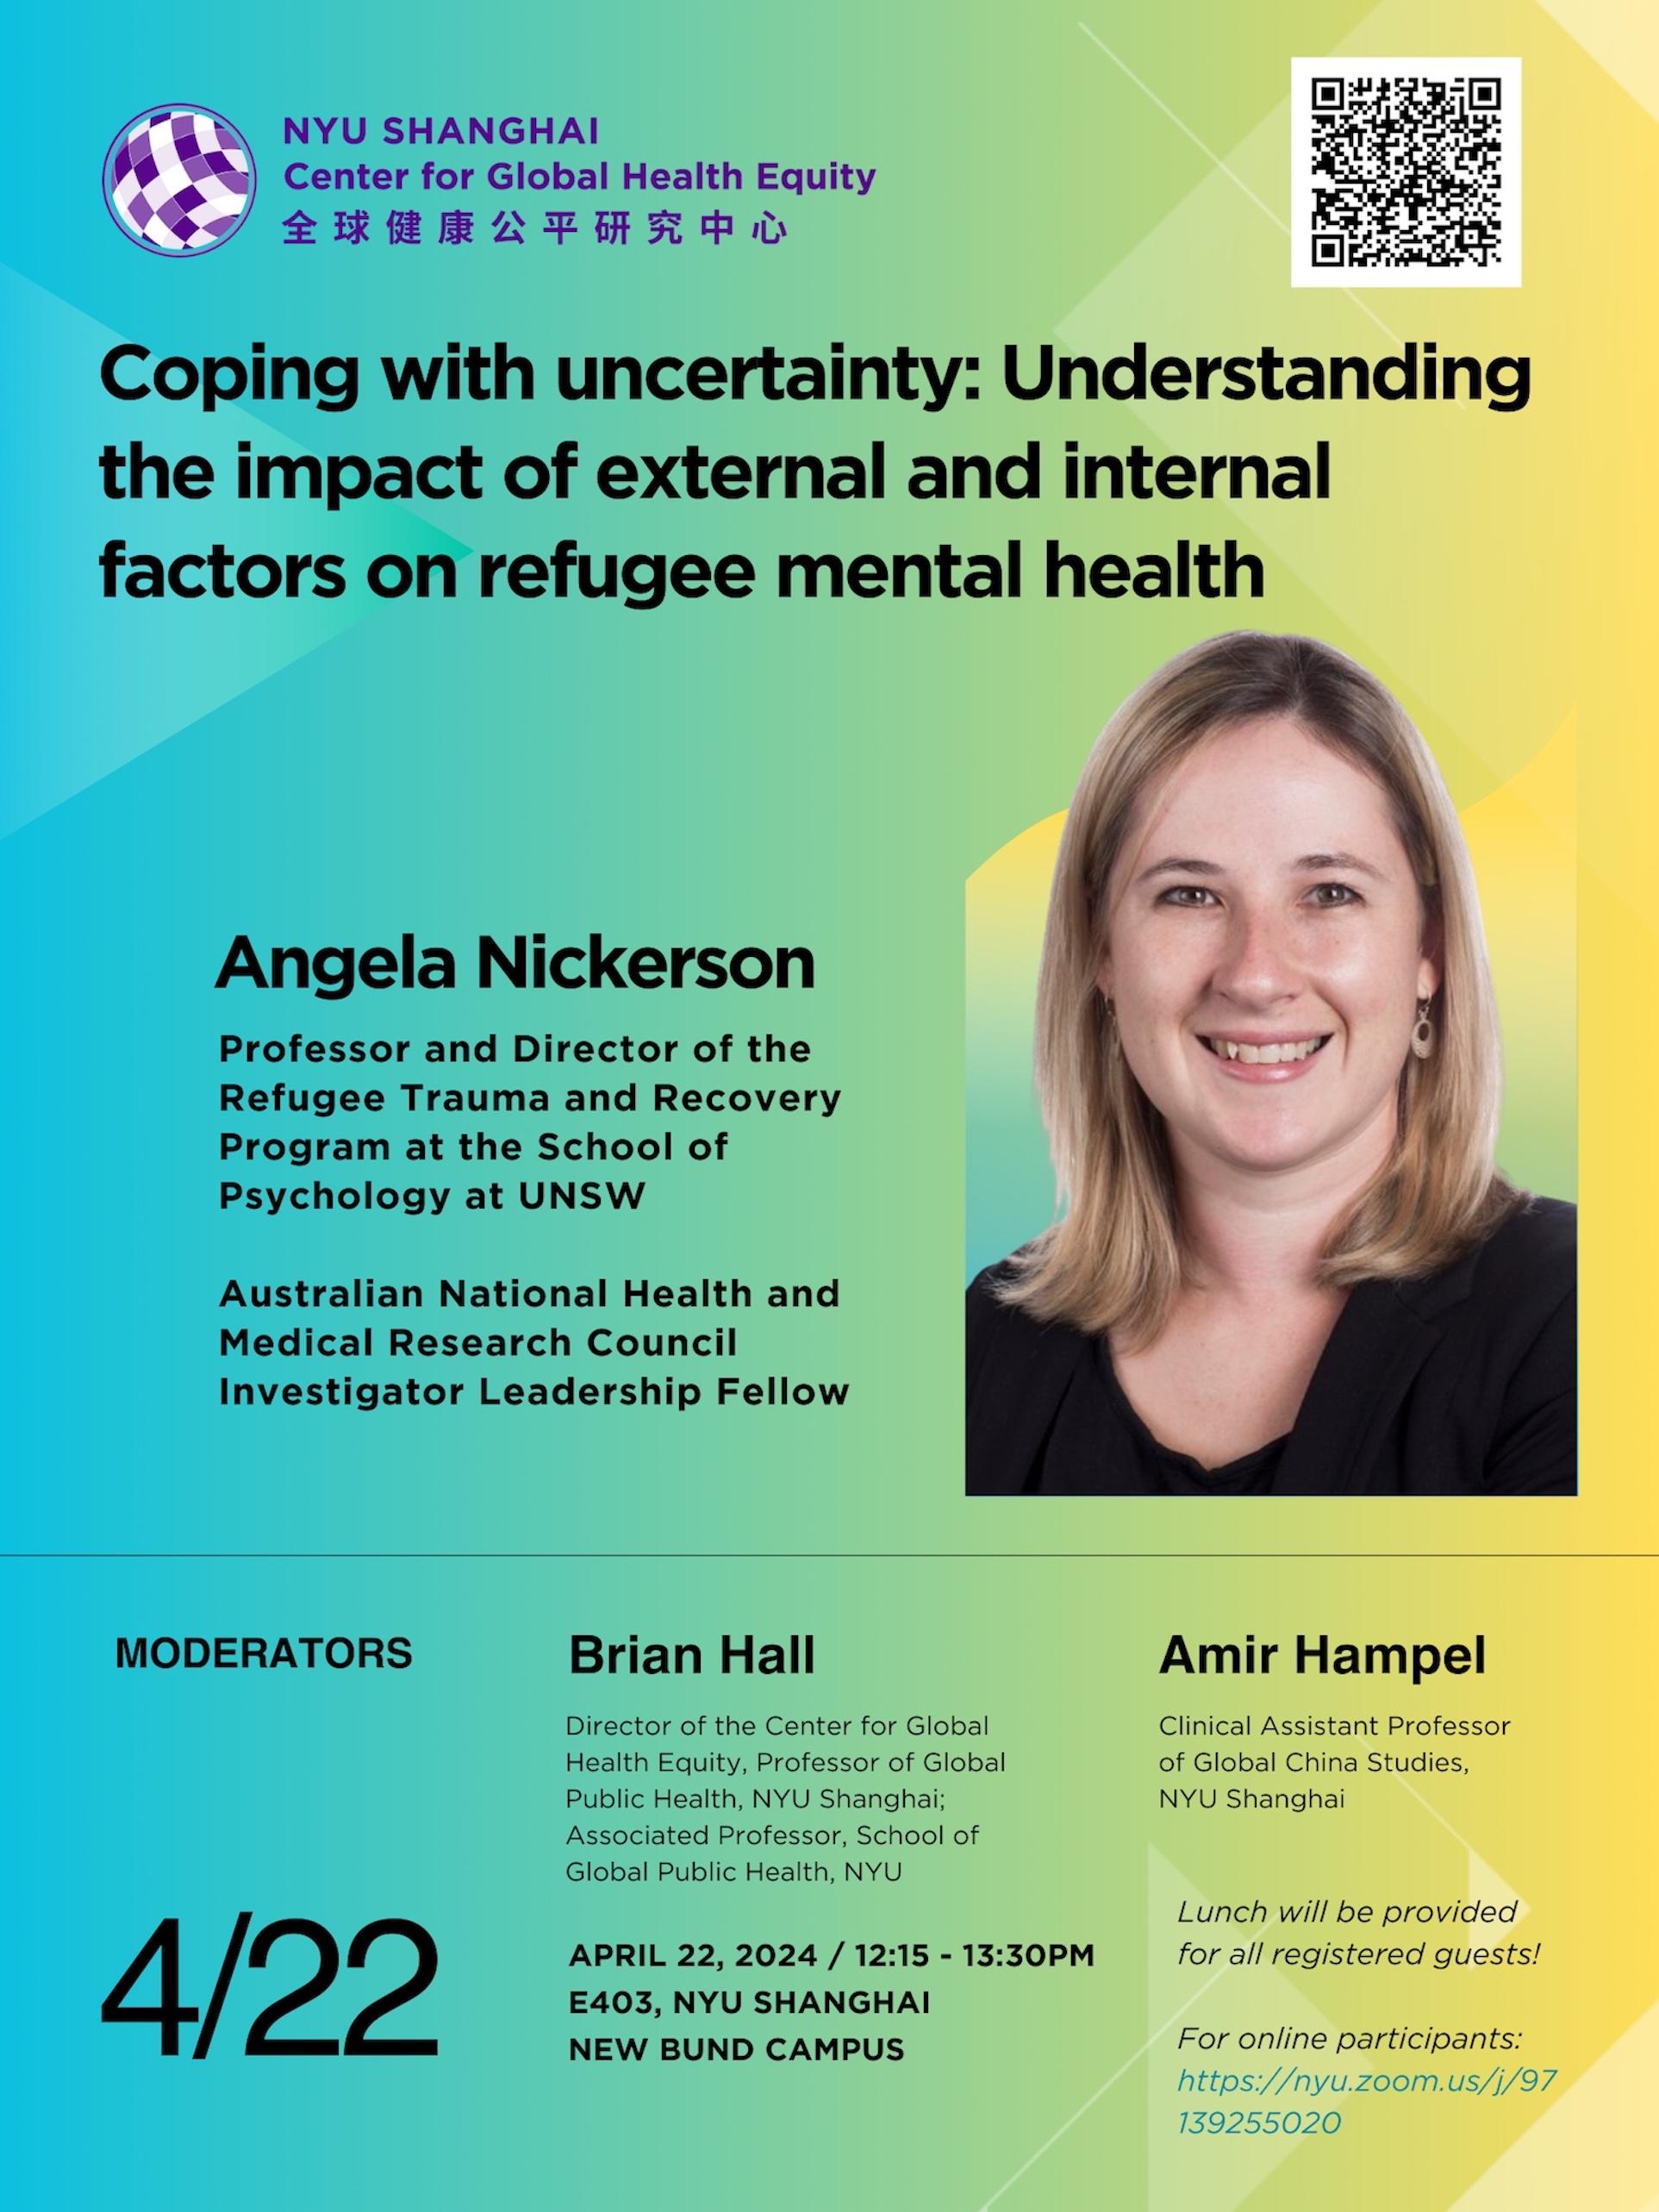 Coping with uncertainty: Understanding the impact of external and internal factors on refugee mental health